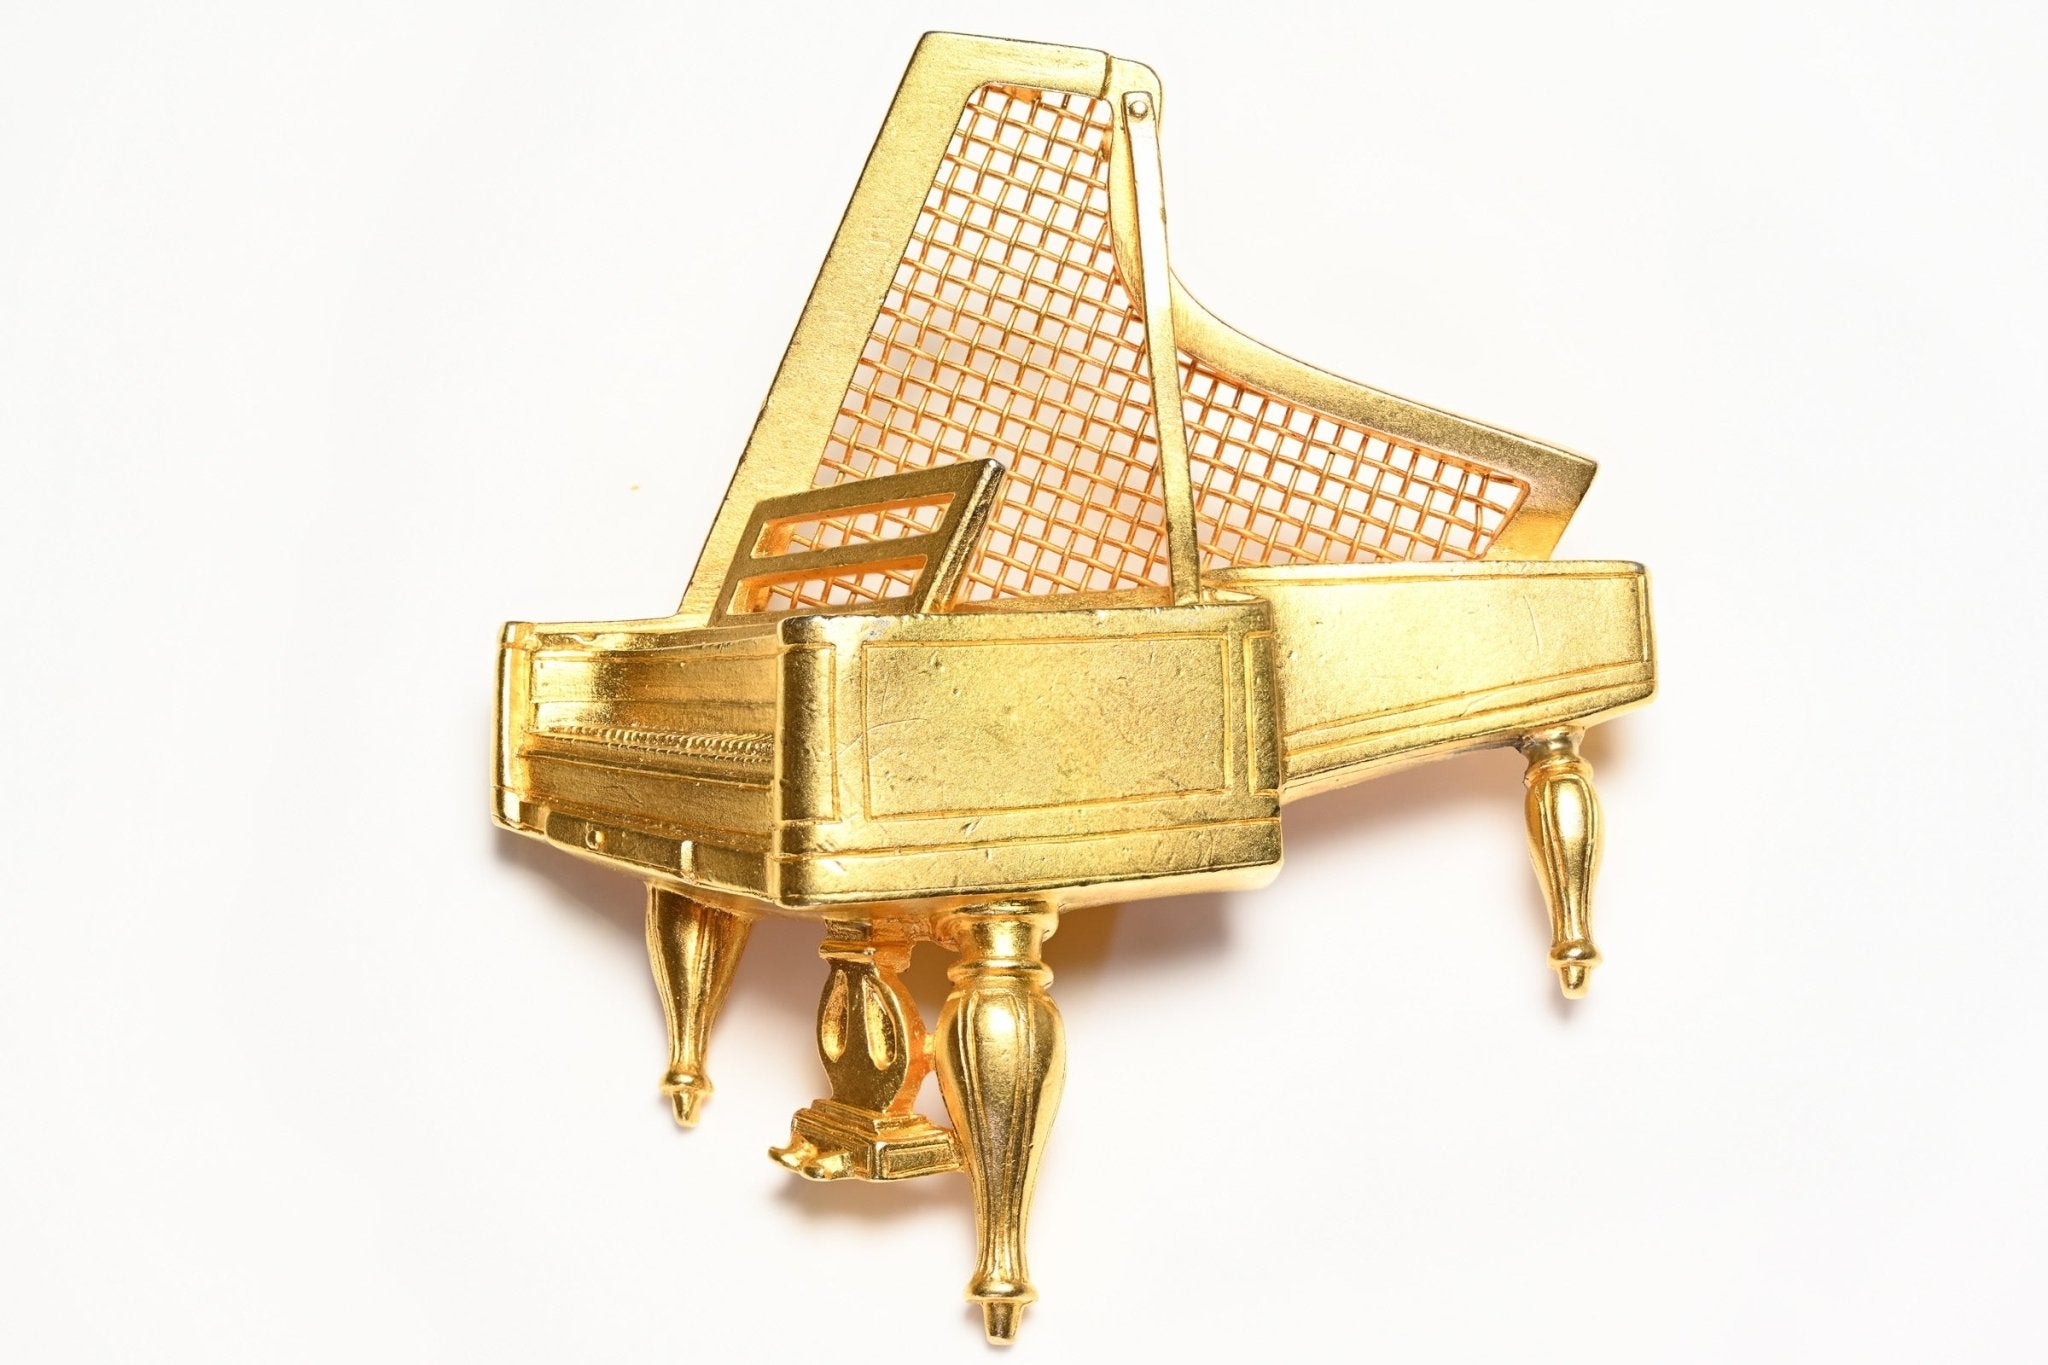 Vintage Karl Lagerfeld Paris Gold Plated Piano Brooch